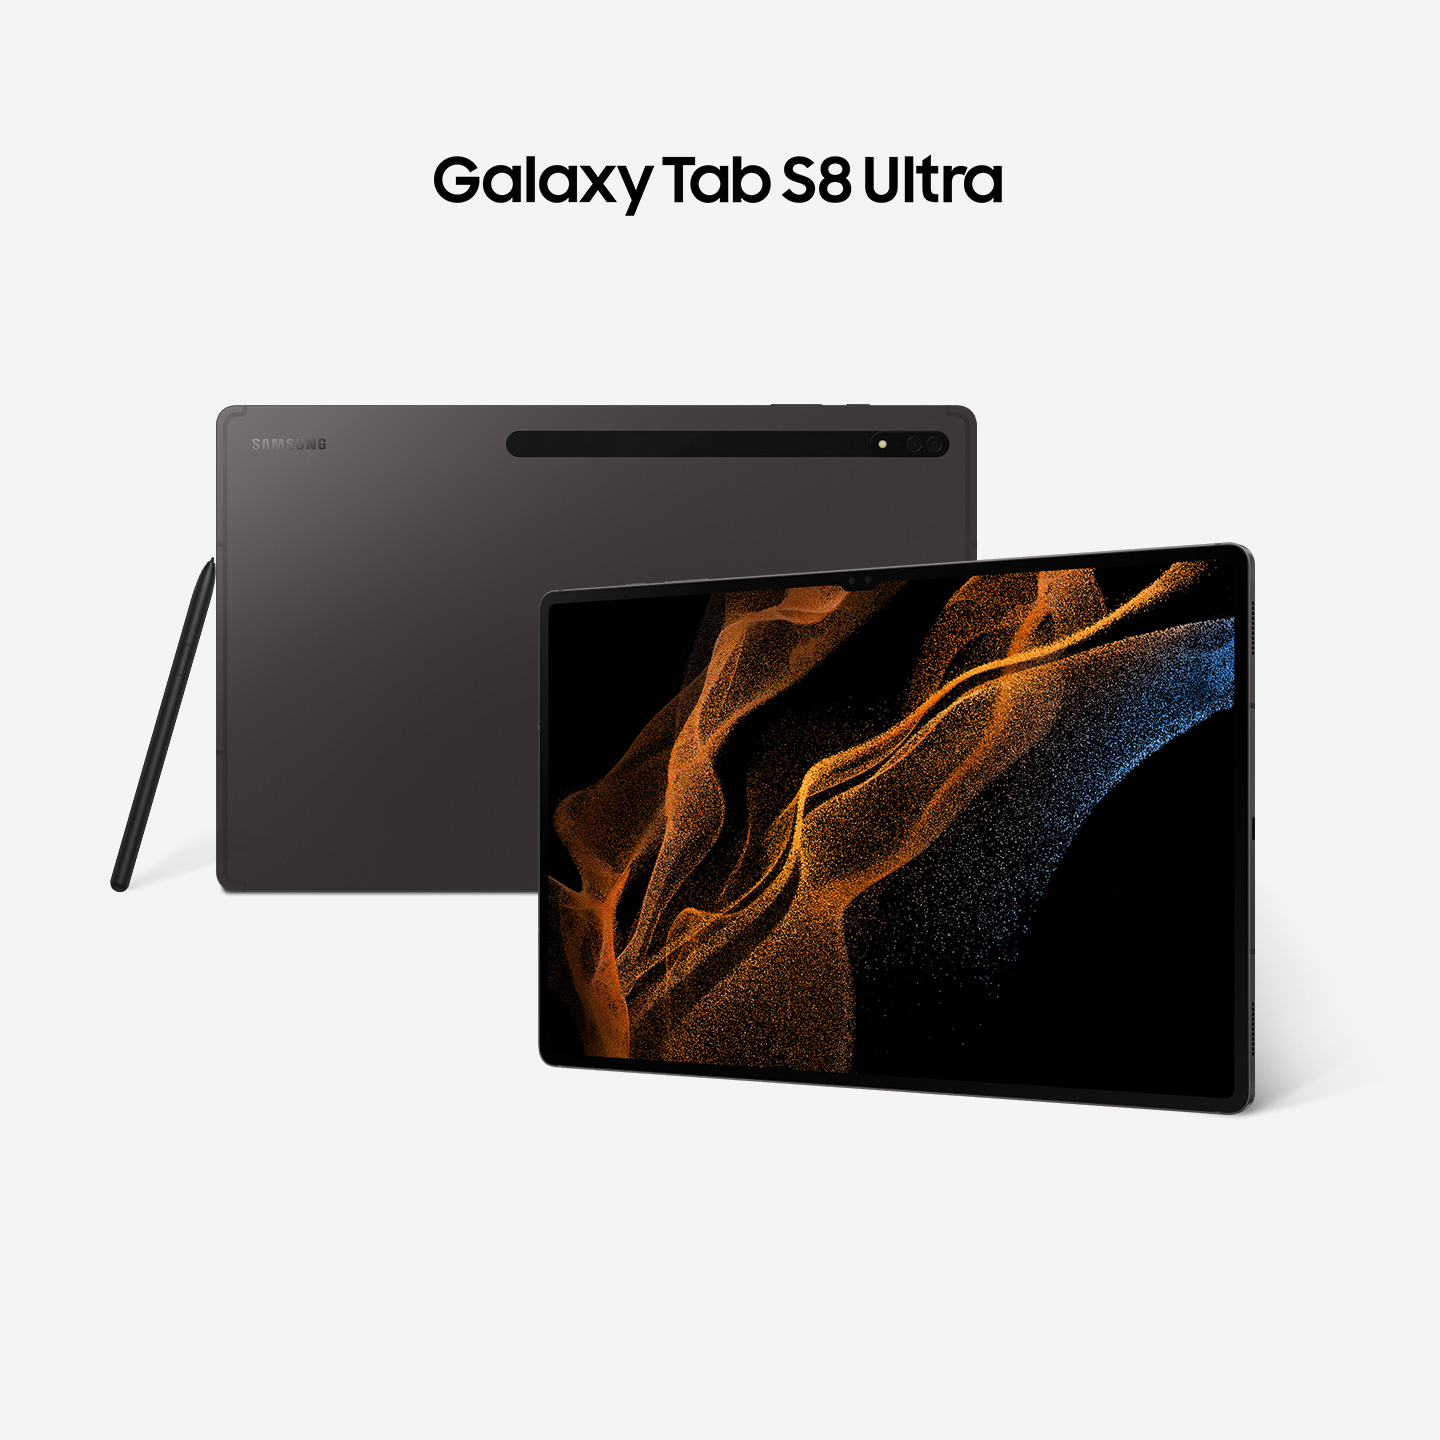 Why You Need Galaxy Tab S8 Mini. There is an issue with Samsung's